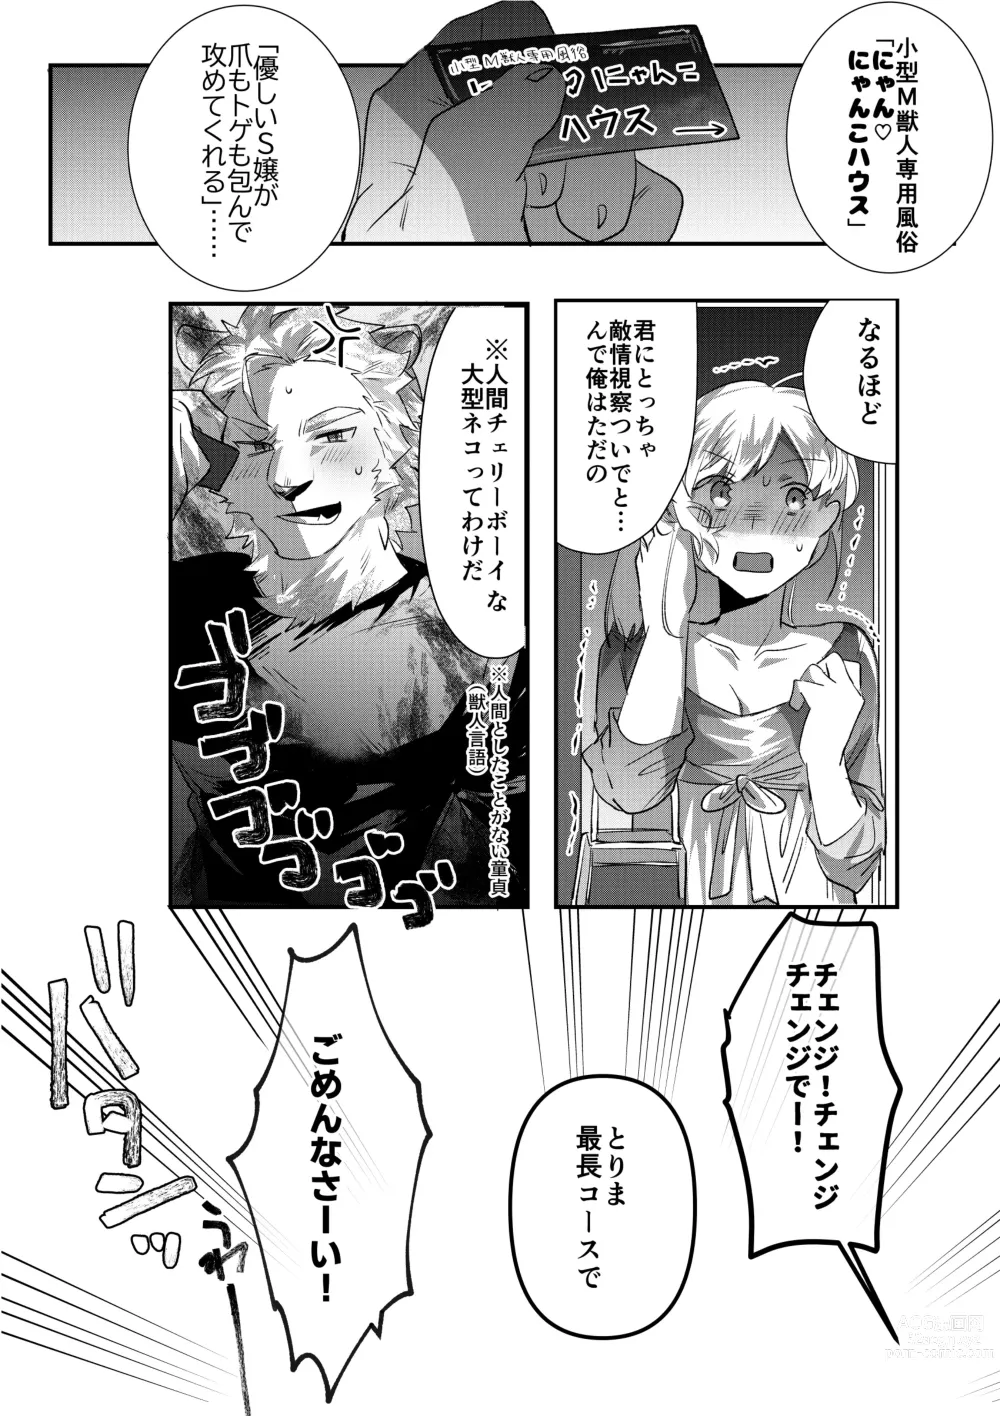 Page 17 of doujinshi Rental Lion to LoveHo